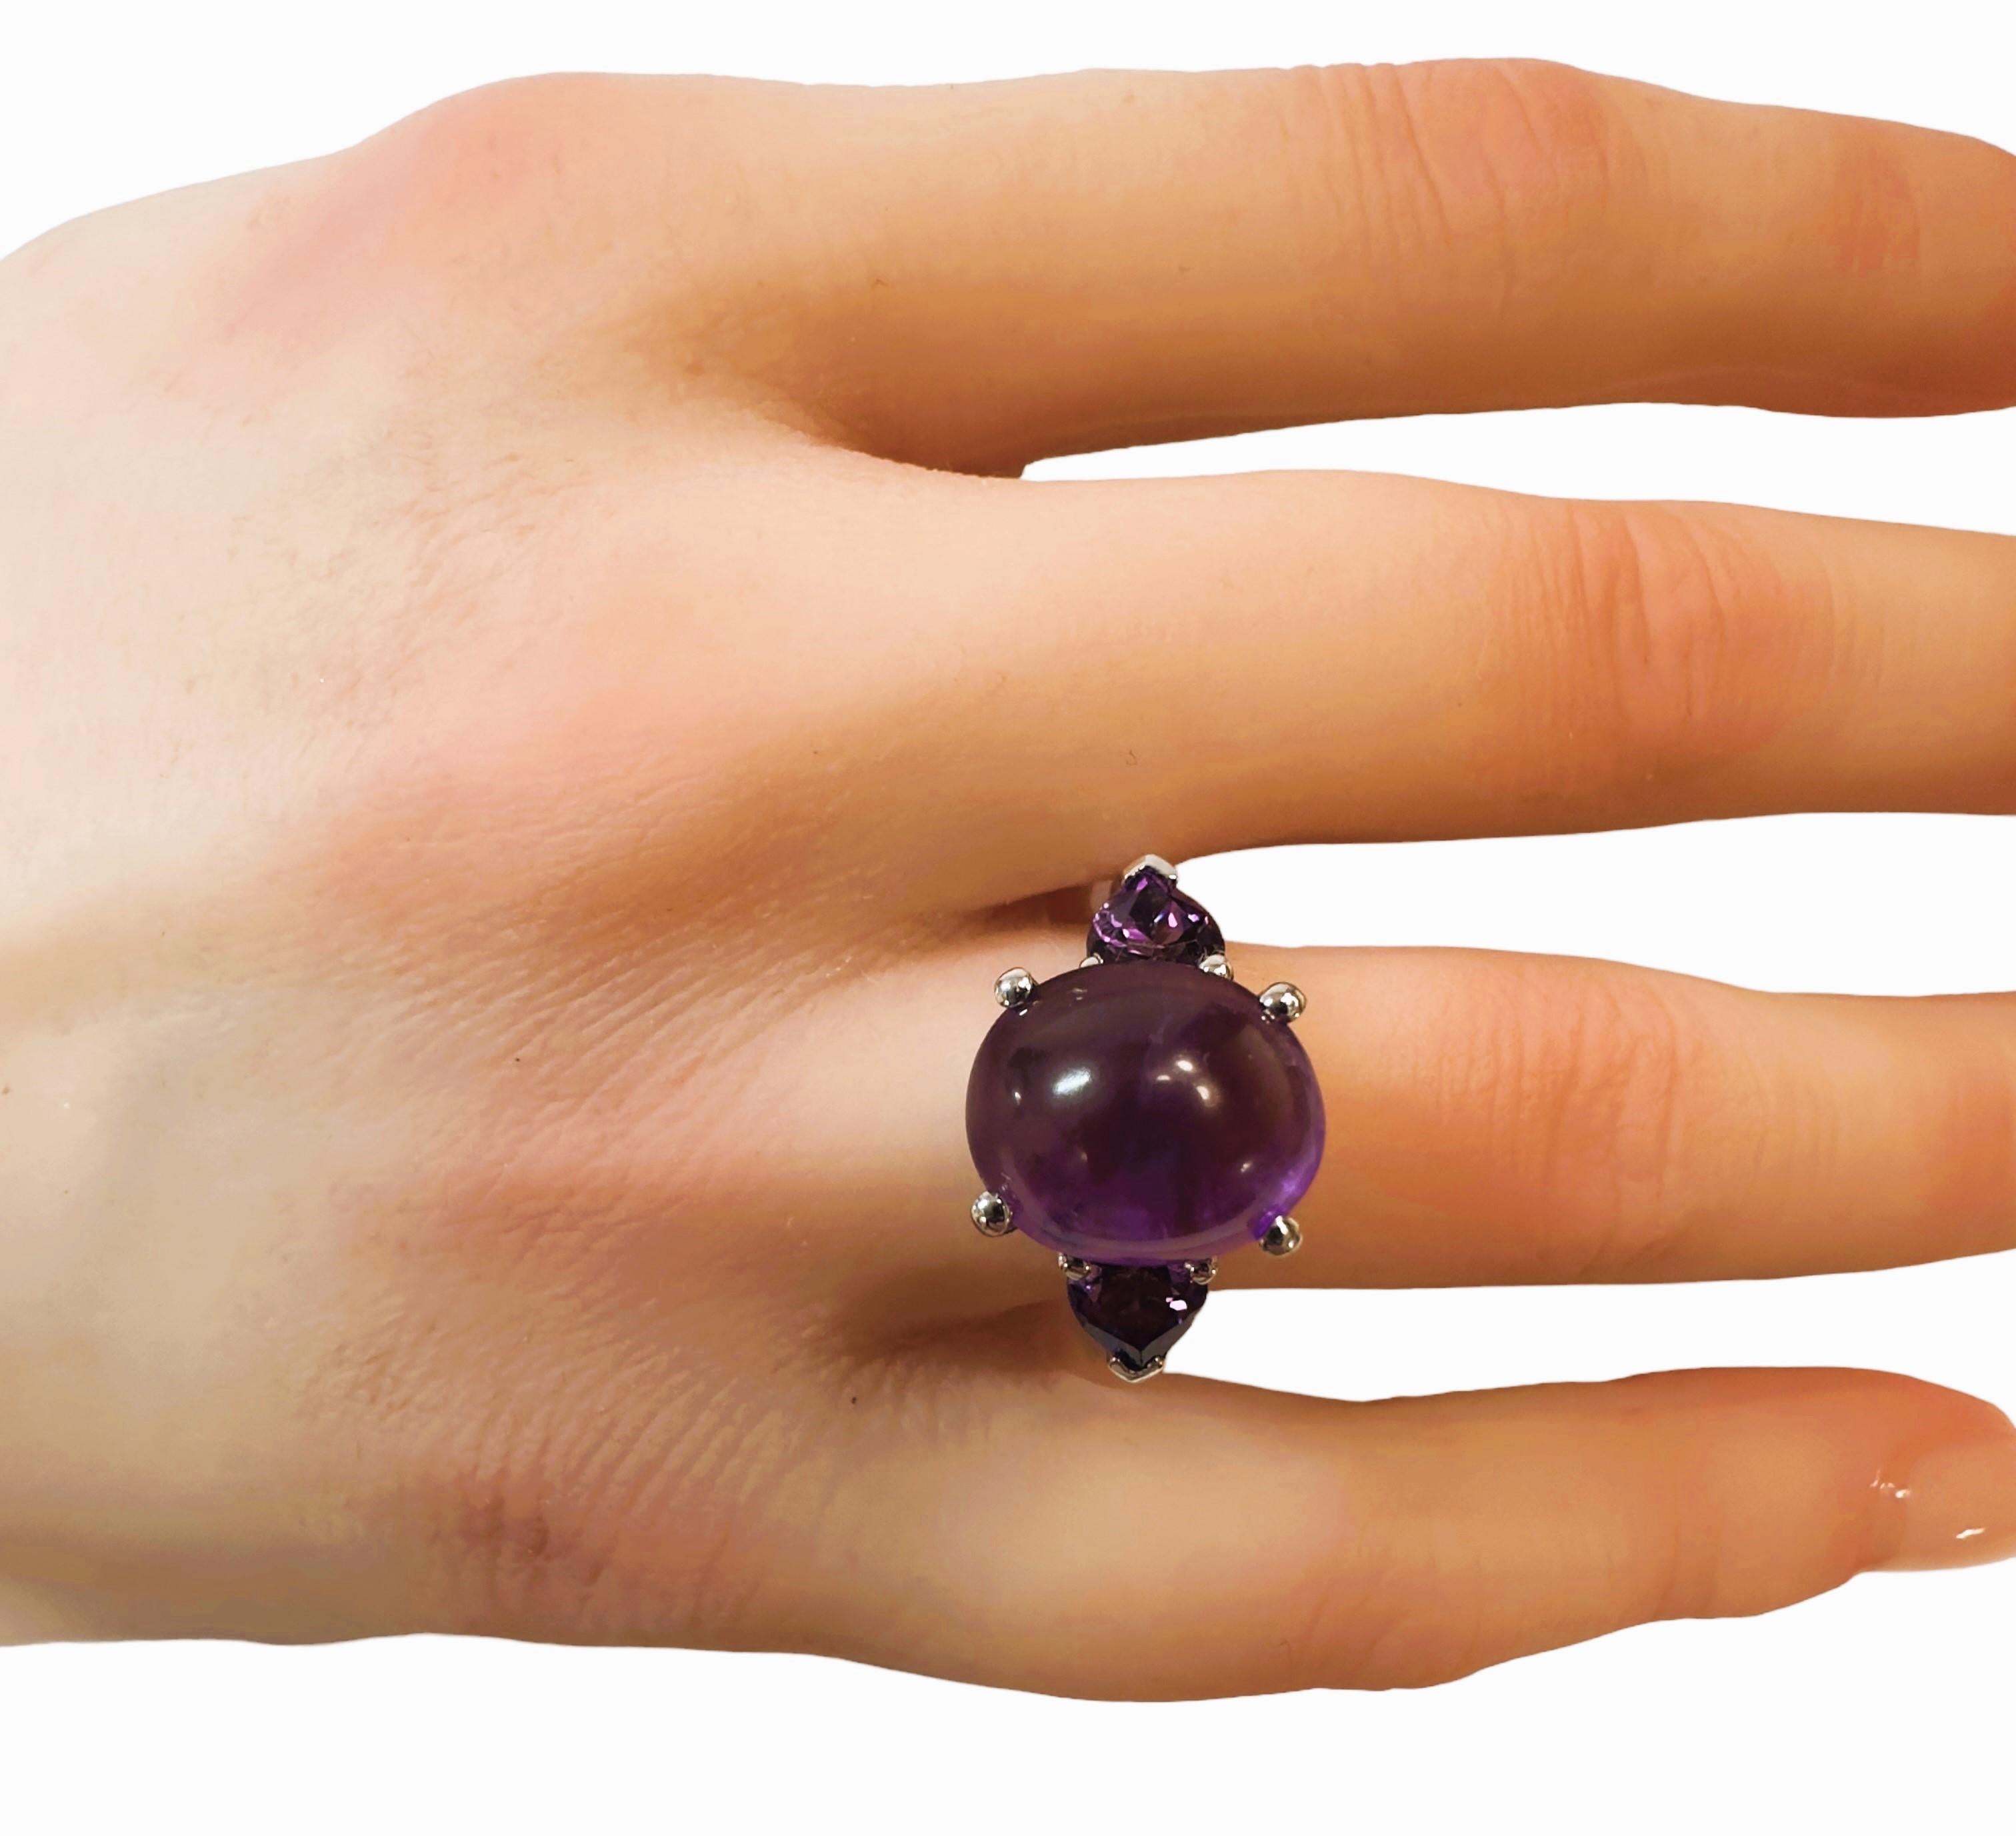 New Brazilian 7.3 Ct Cabochon & Trillion Cut Amethyst Sterling Ring Size 7 For Sale 3